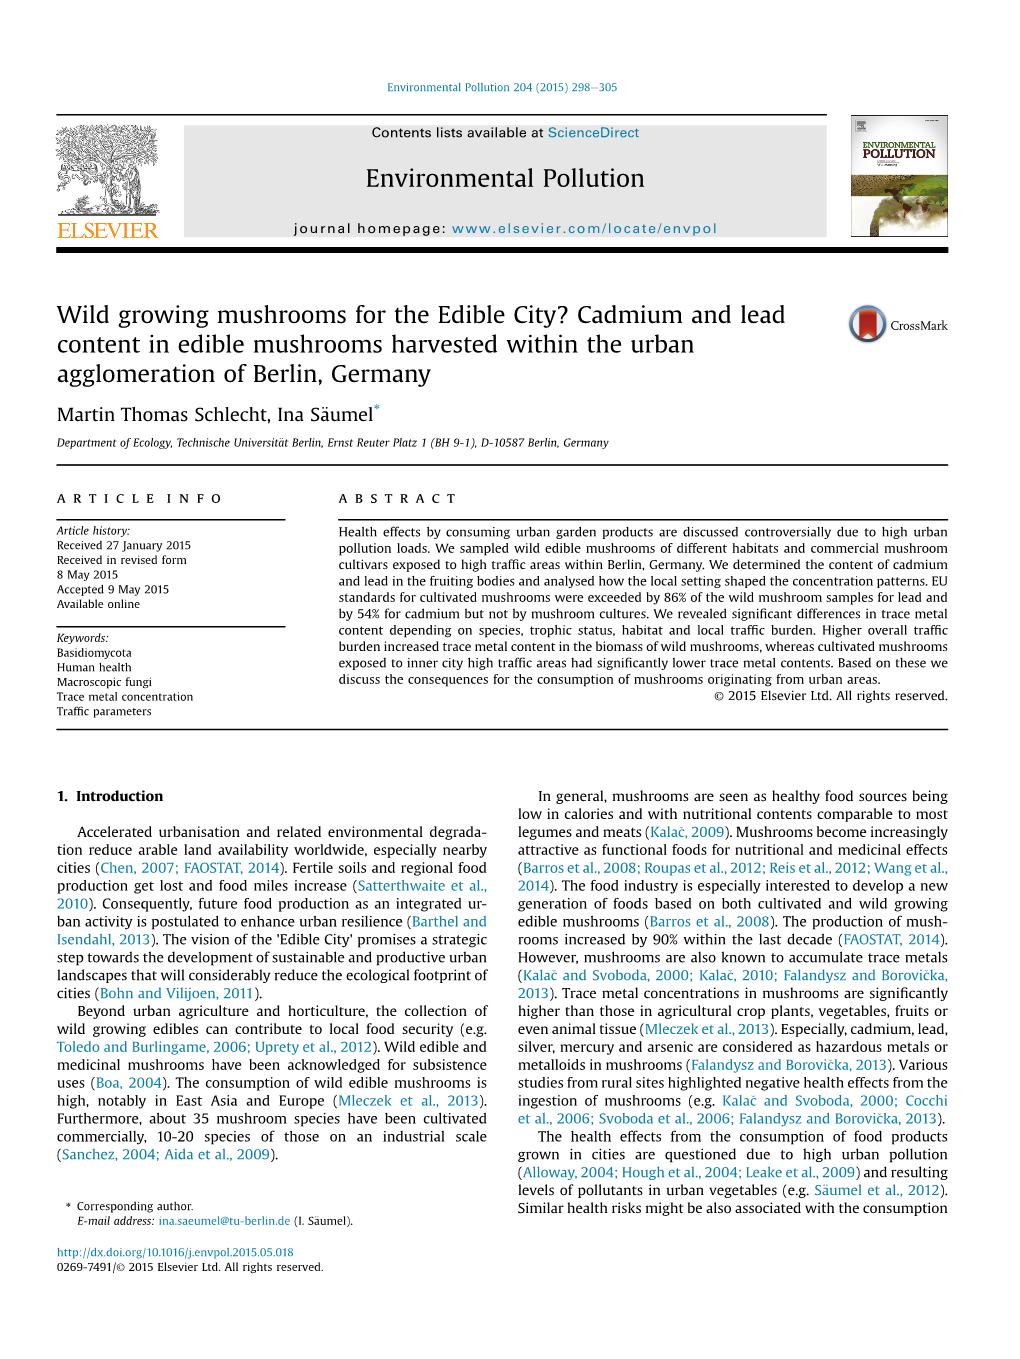 Wild Growing Mushrooms for the Edible City? Cadmium and Lead Content in Edible Mushrooms Harvested Within the Urban Agglomeration of Berlin, Germany